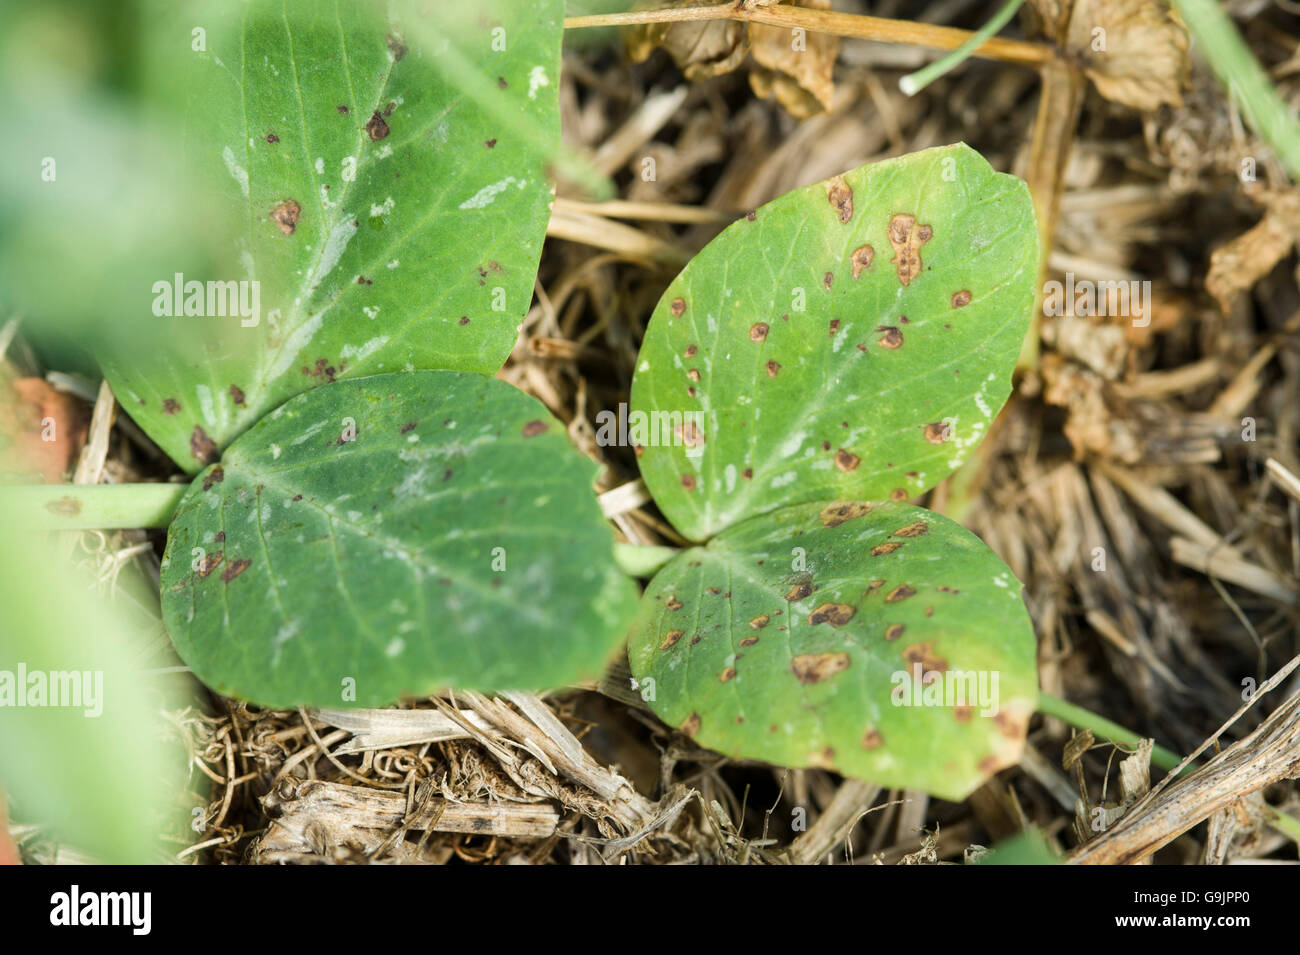 Leaf and stem blight on peas Stock Photo